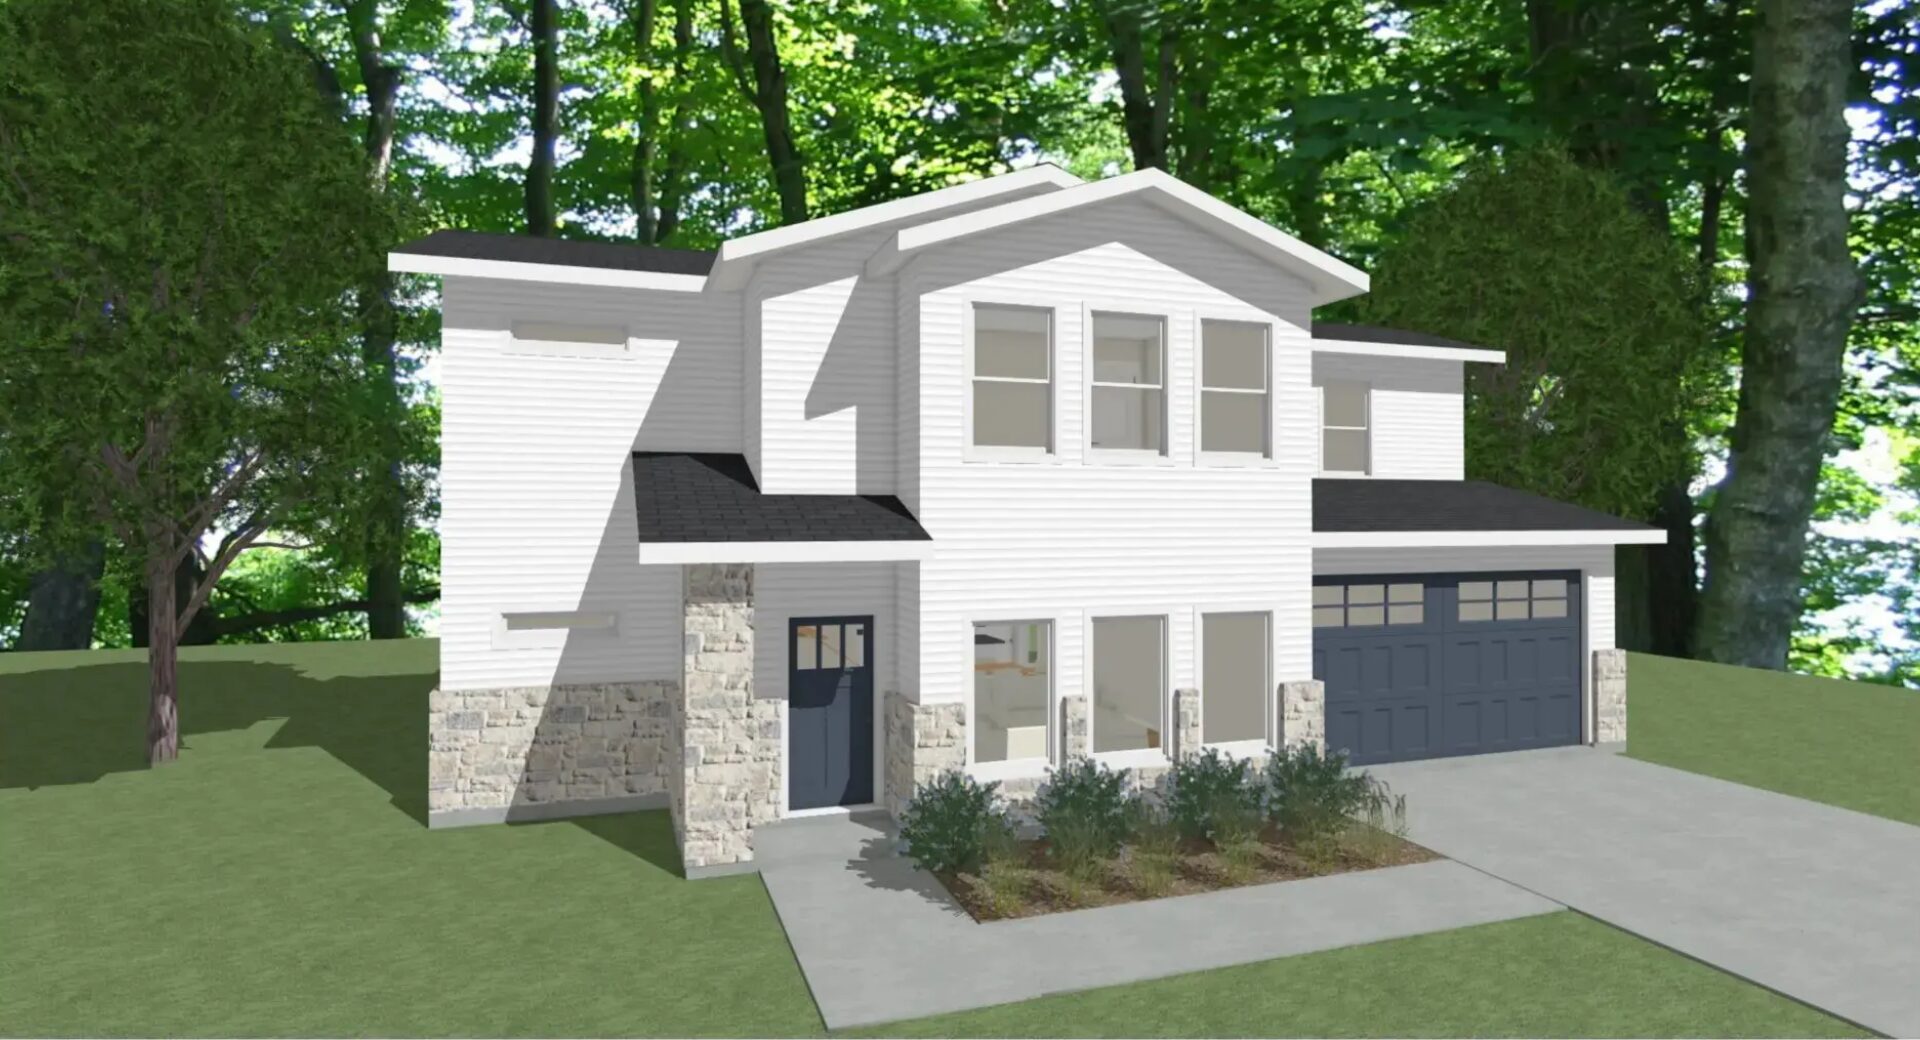 A rendering of a two story home in the woods.